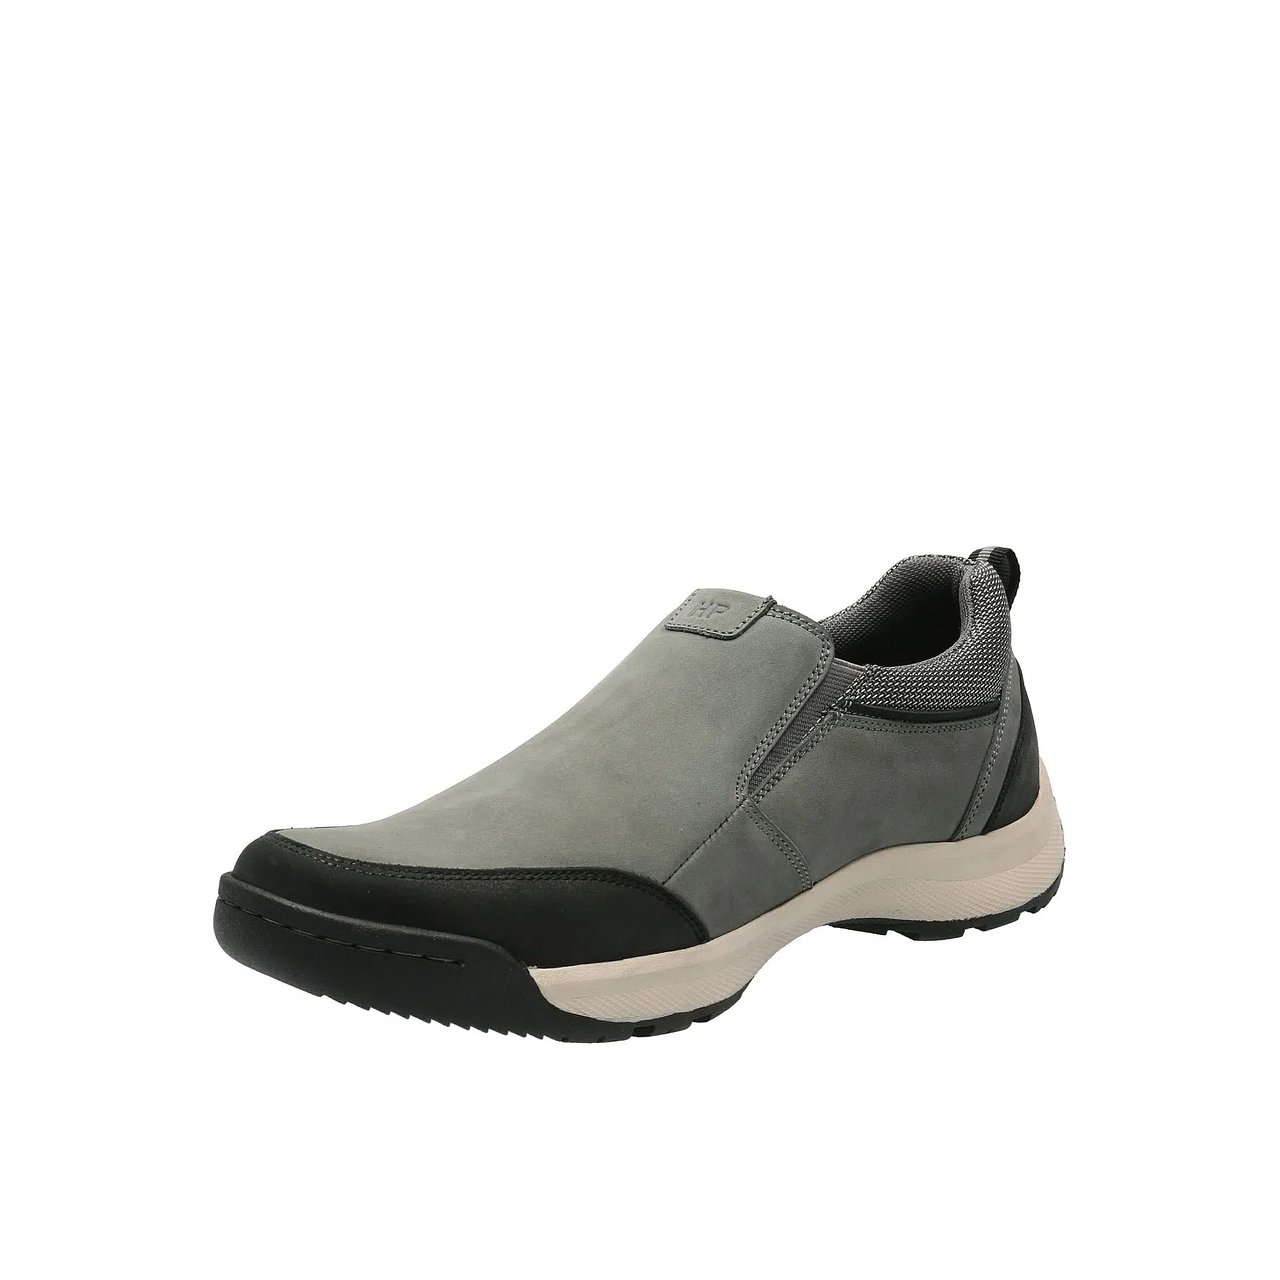 ZAPATO HOMBRE HUSH PUPPIES GREY HP11001111126 ODER